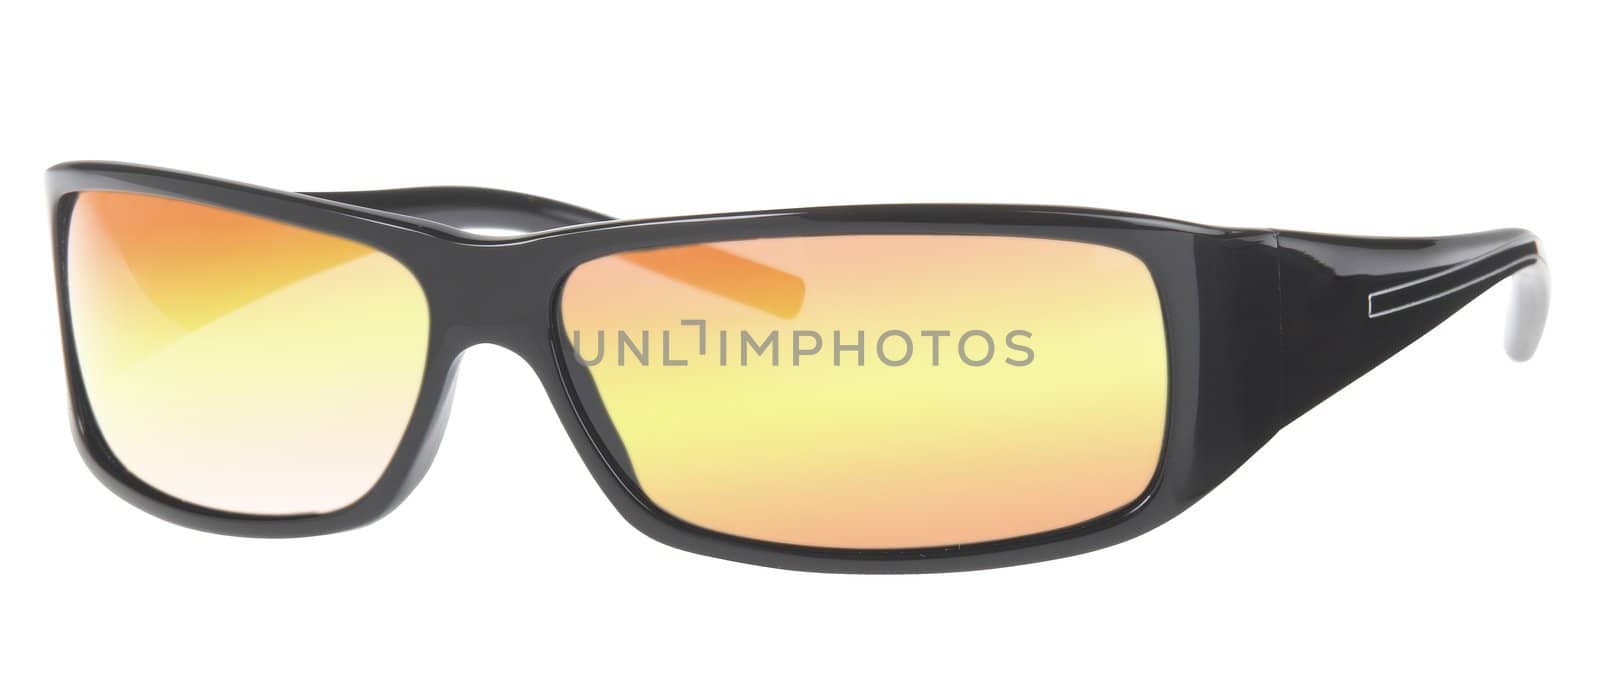 Brown sunglasses isolated on the white background